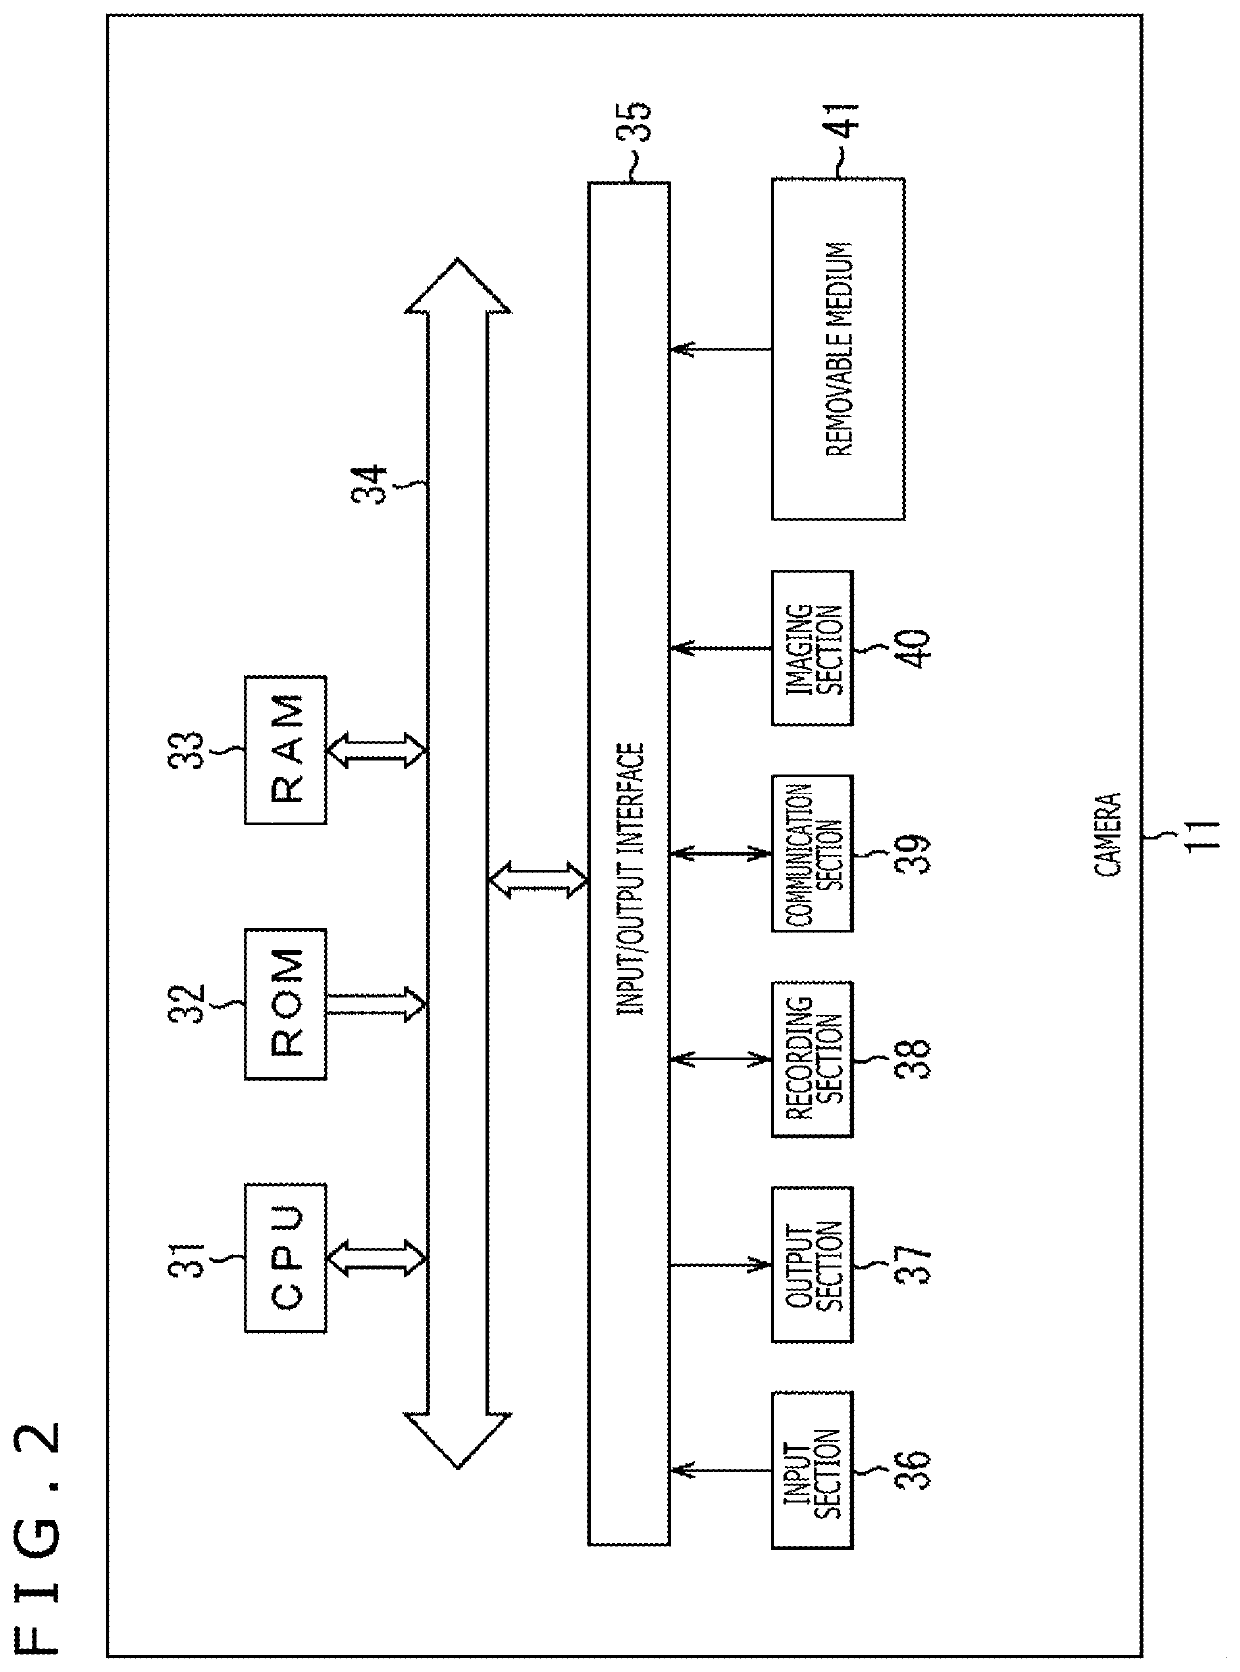 Camera, method, non-transitory computer-readable medium, and system